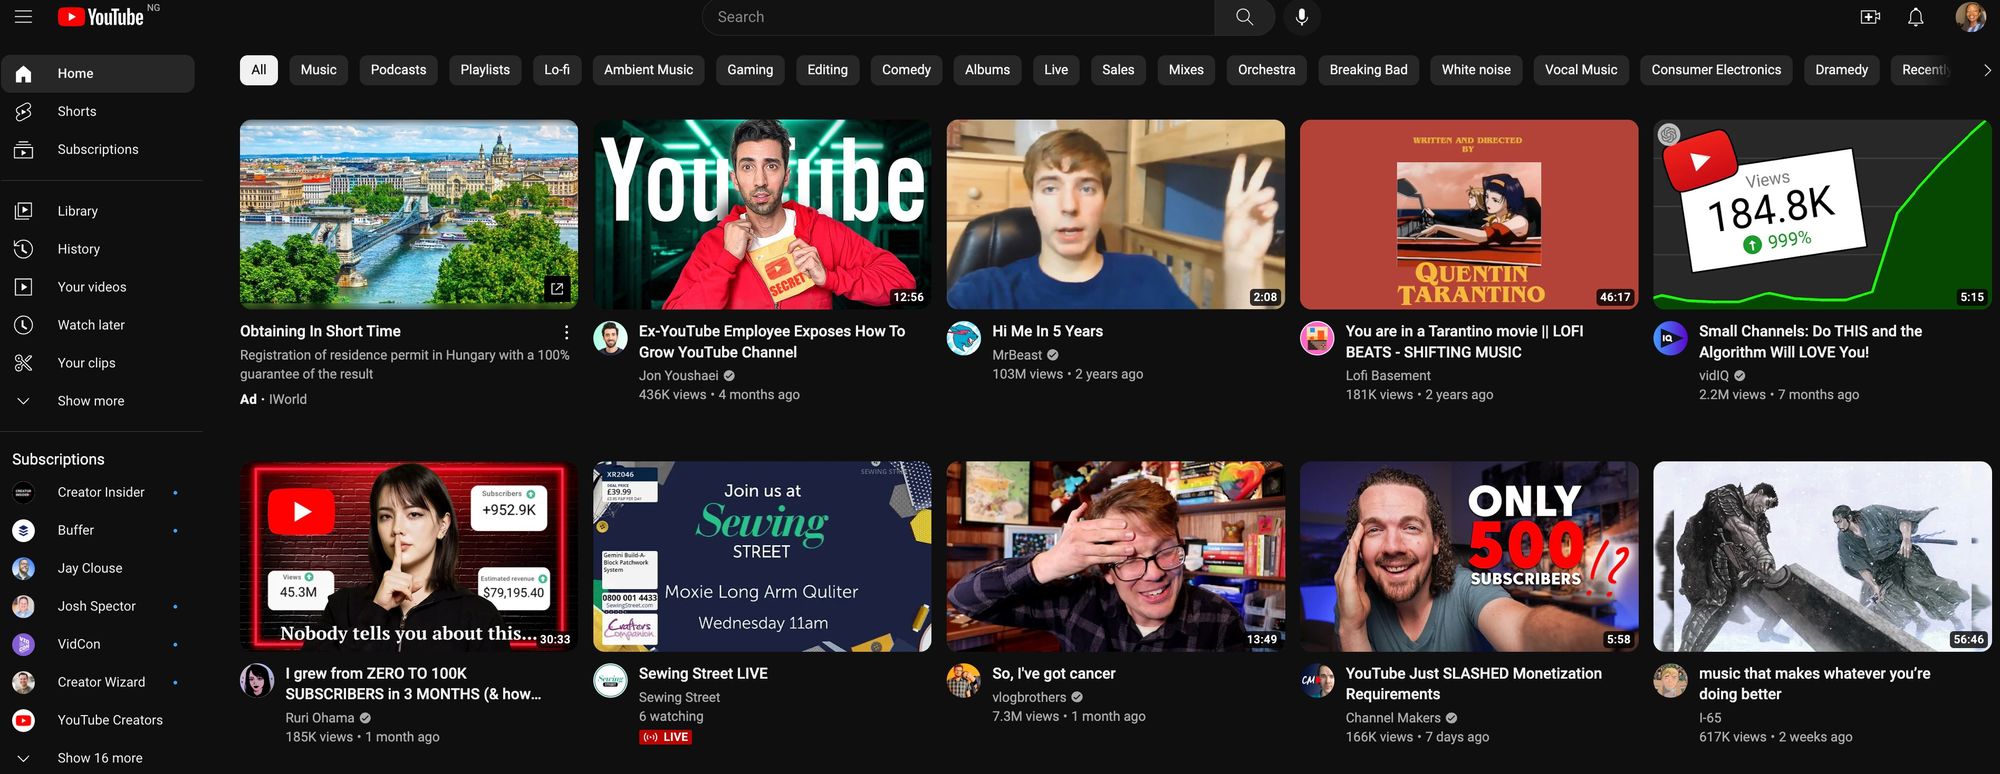 youtube homepage recommendations